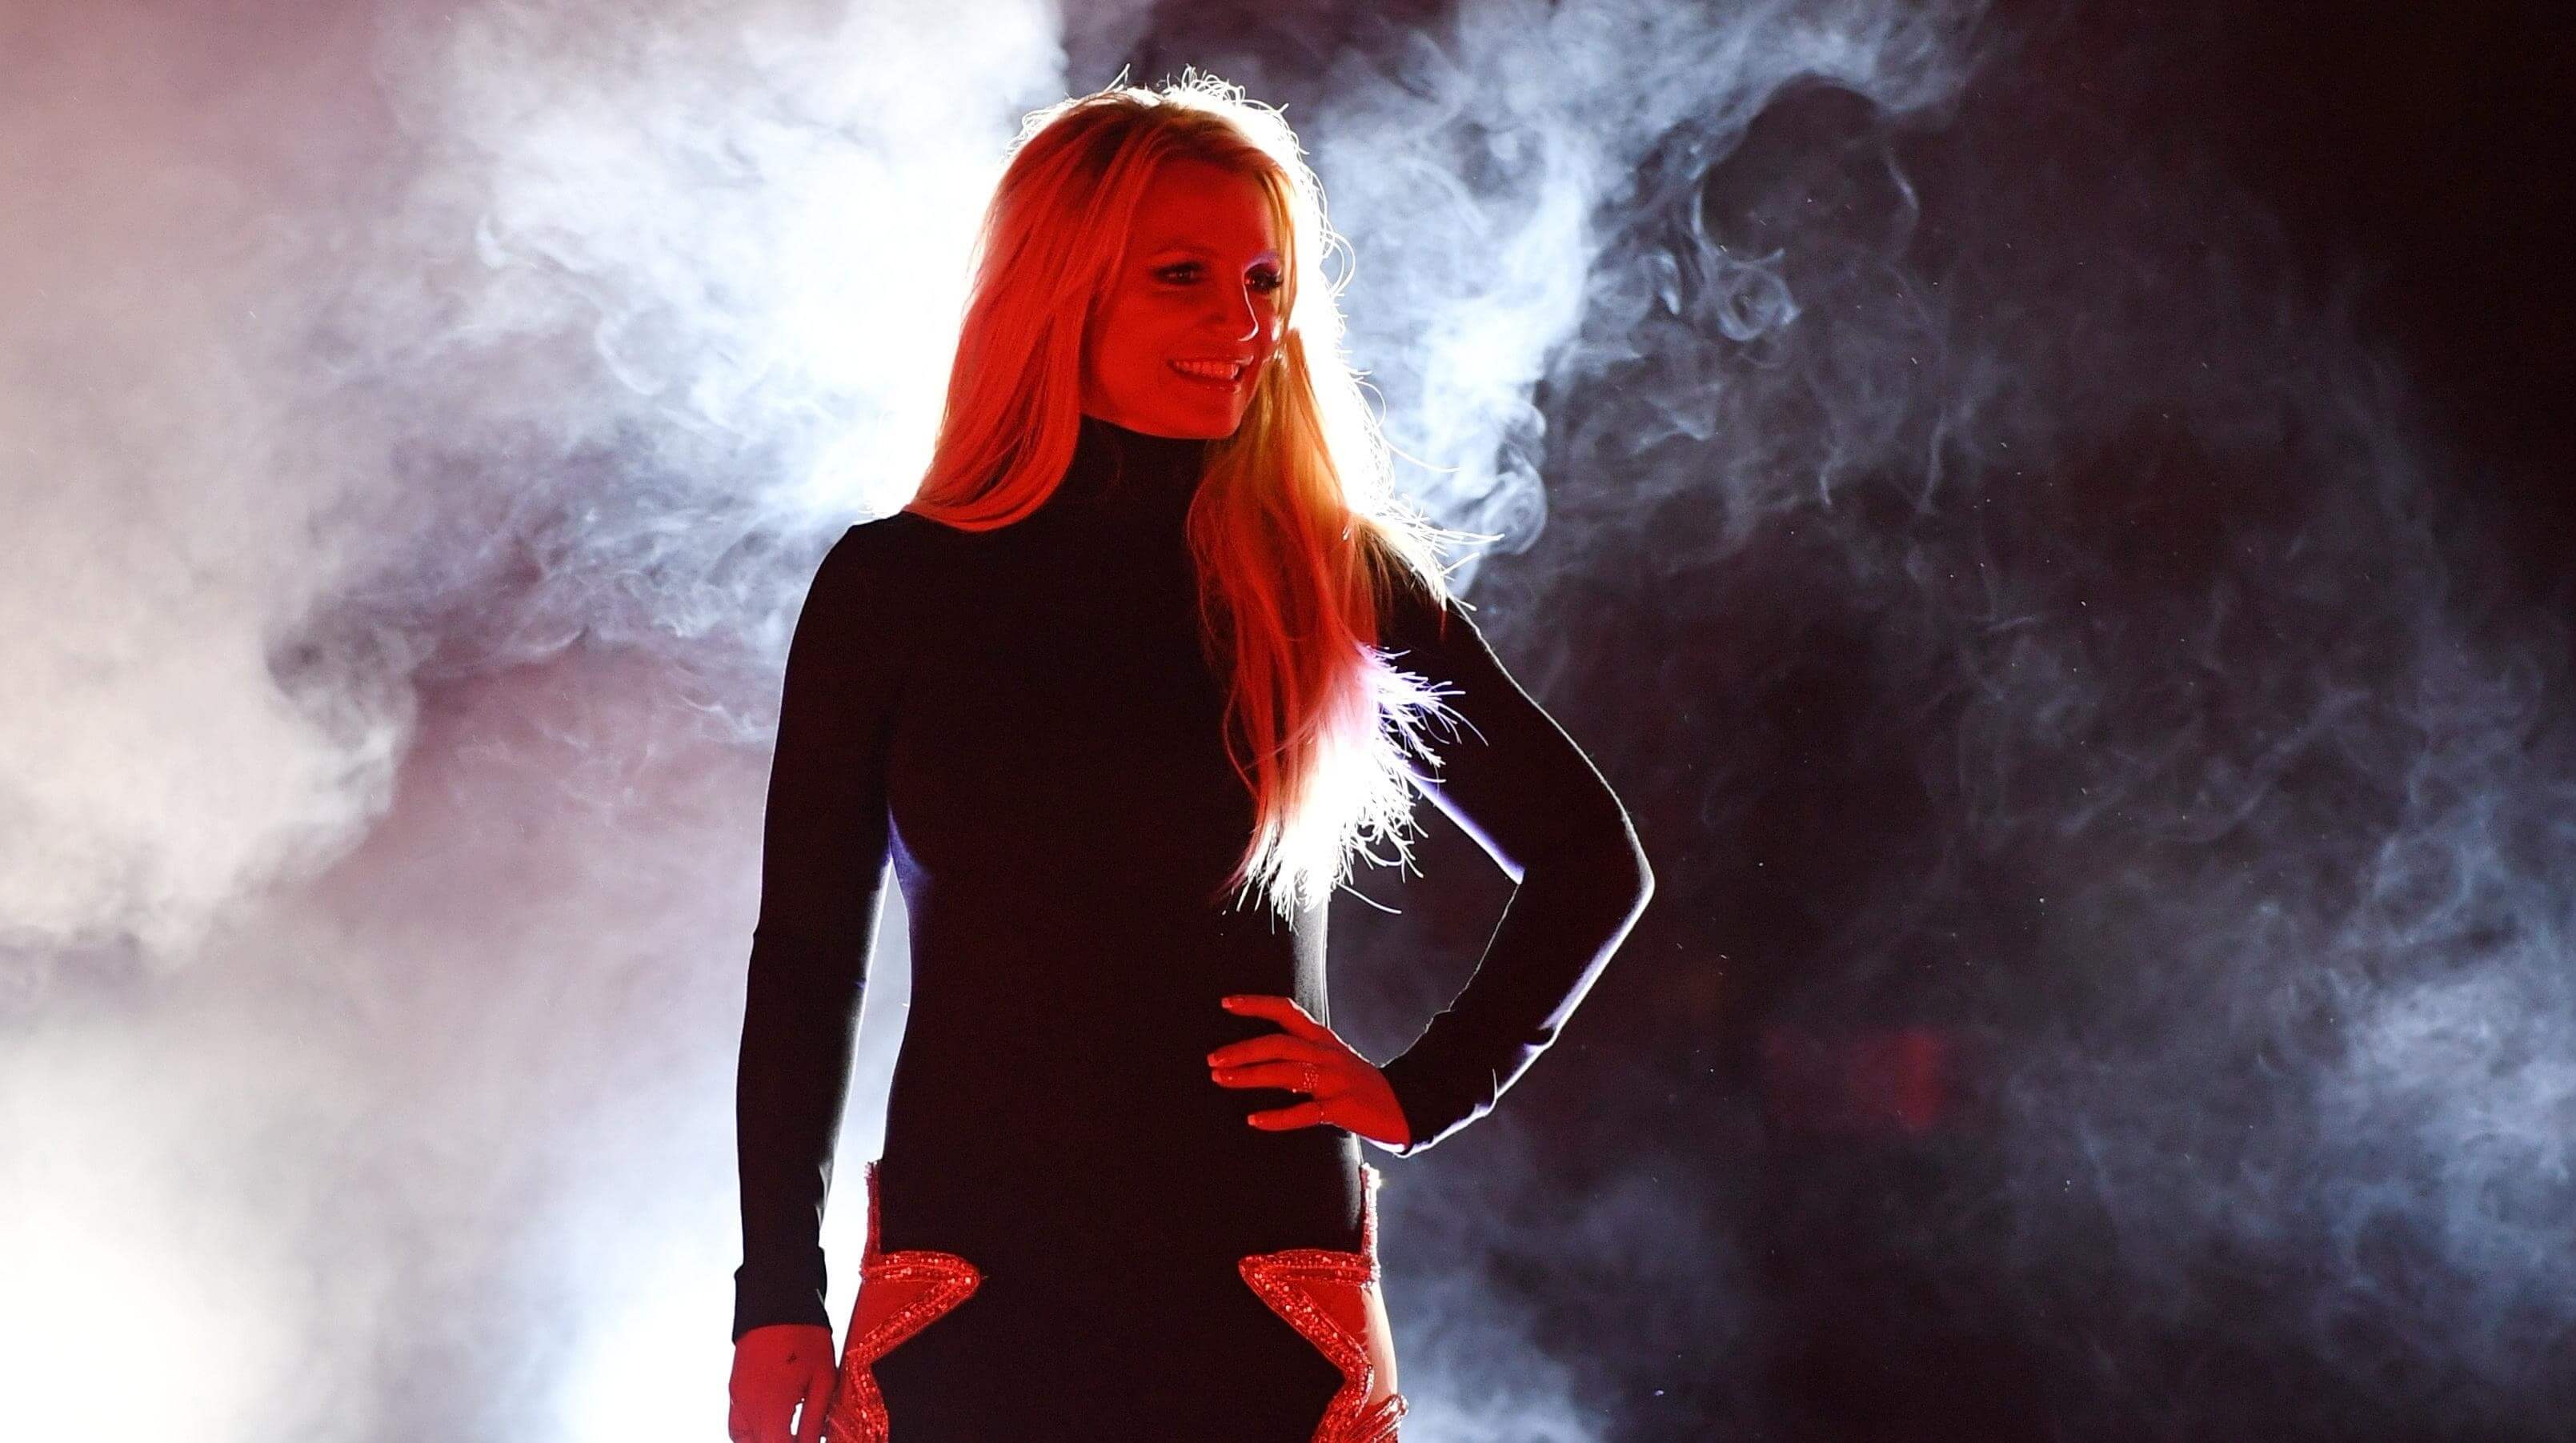 Britney Spears declares she will “never return to the music industry”